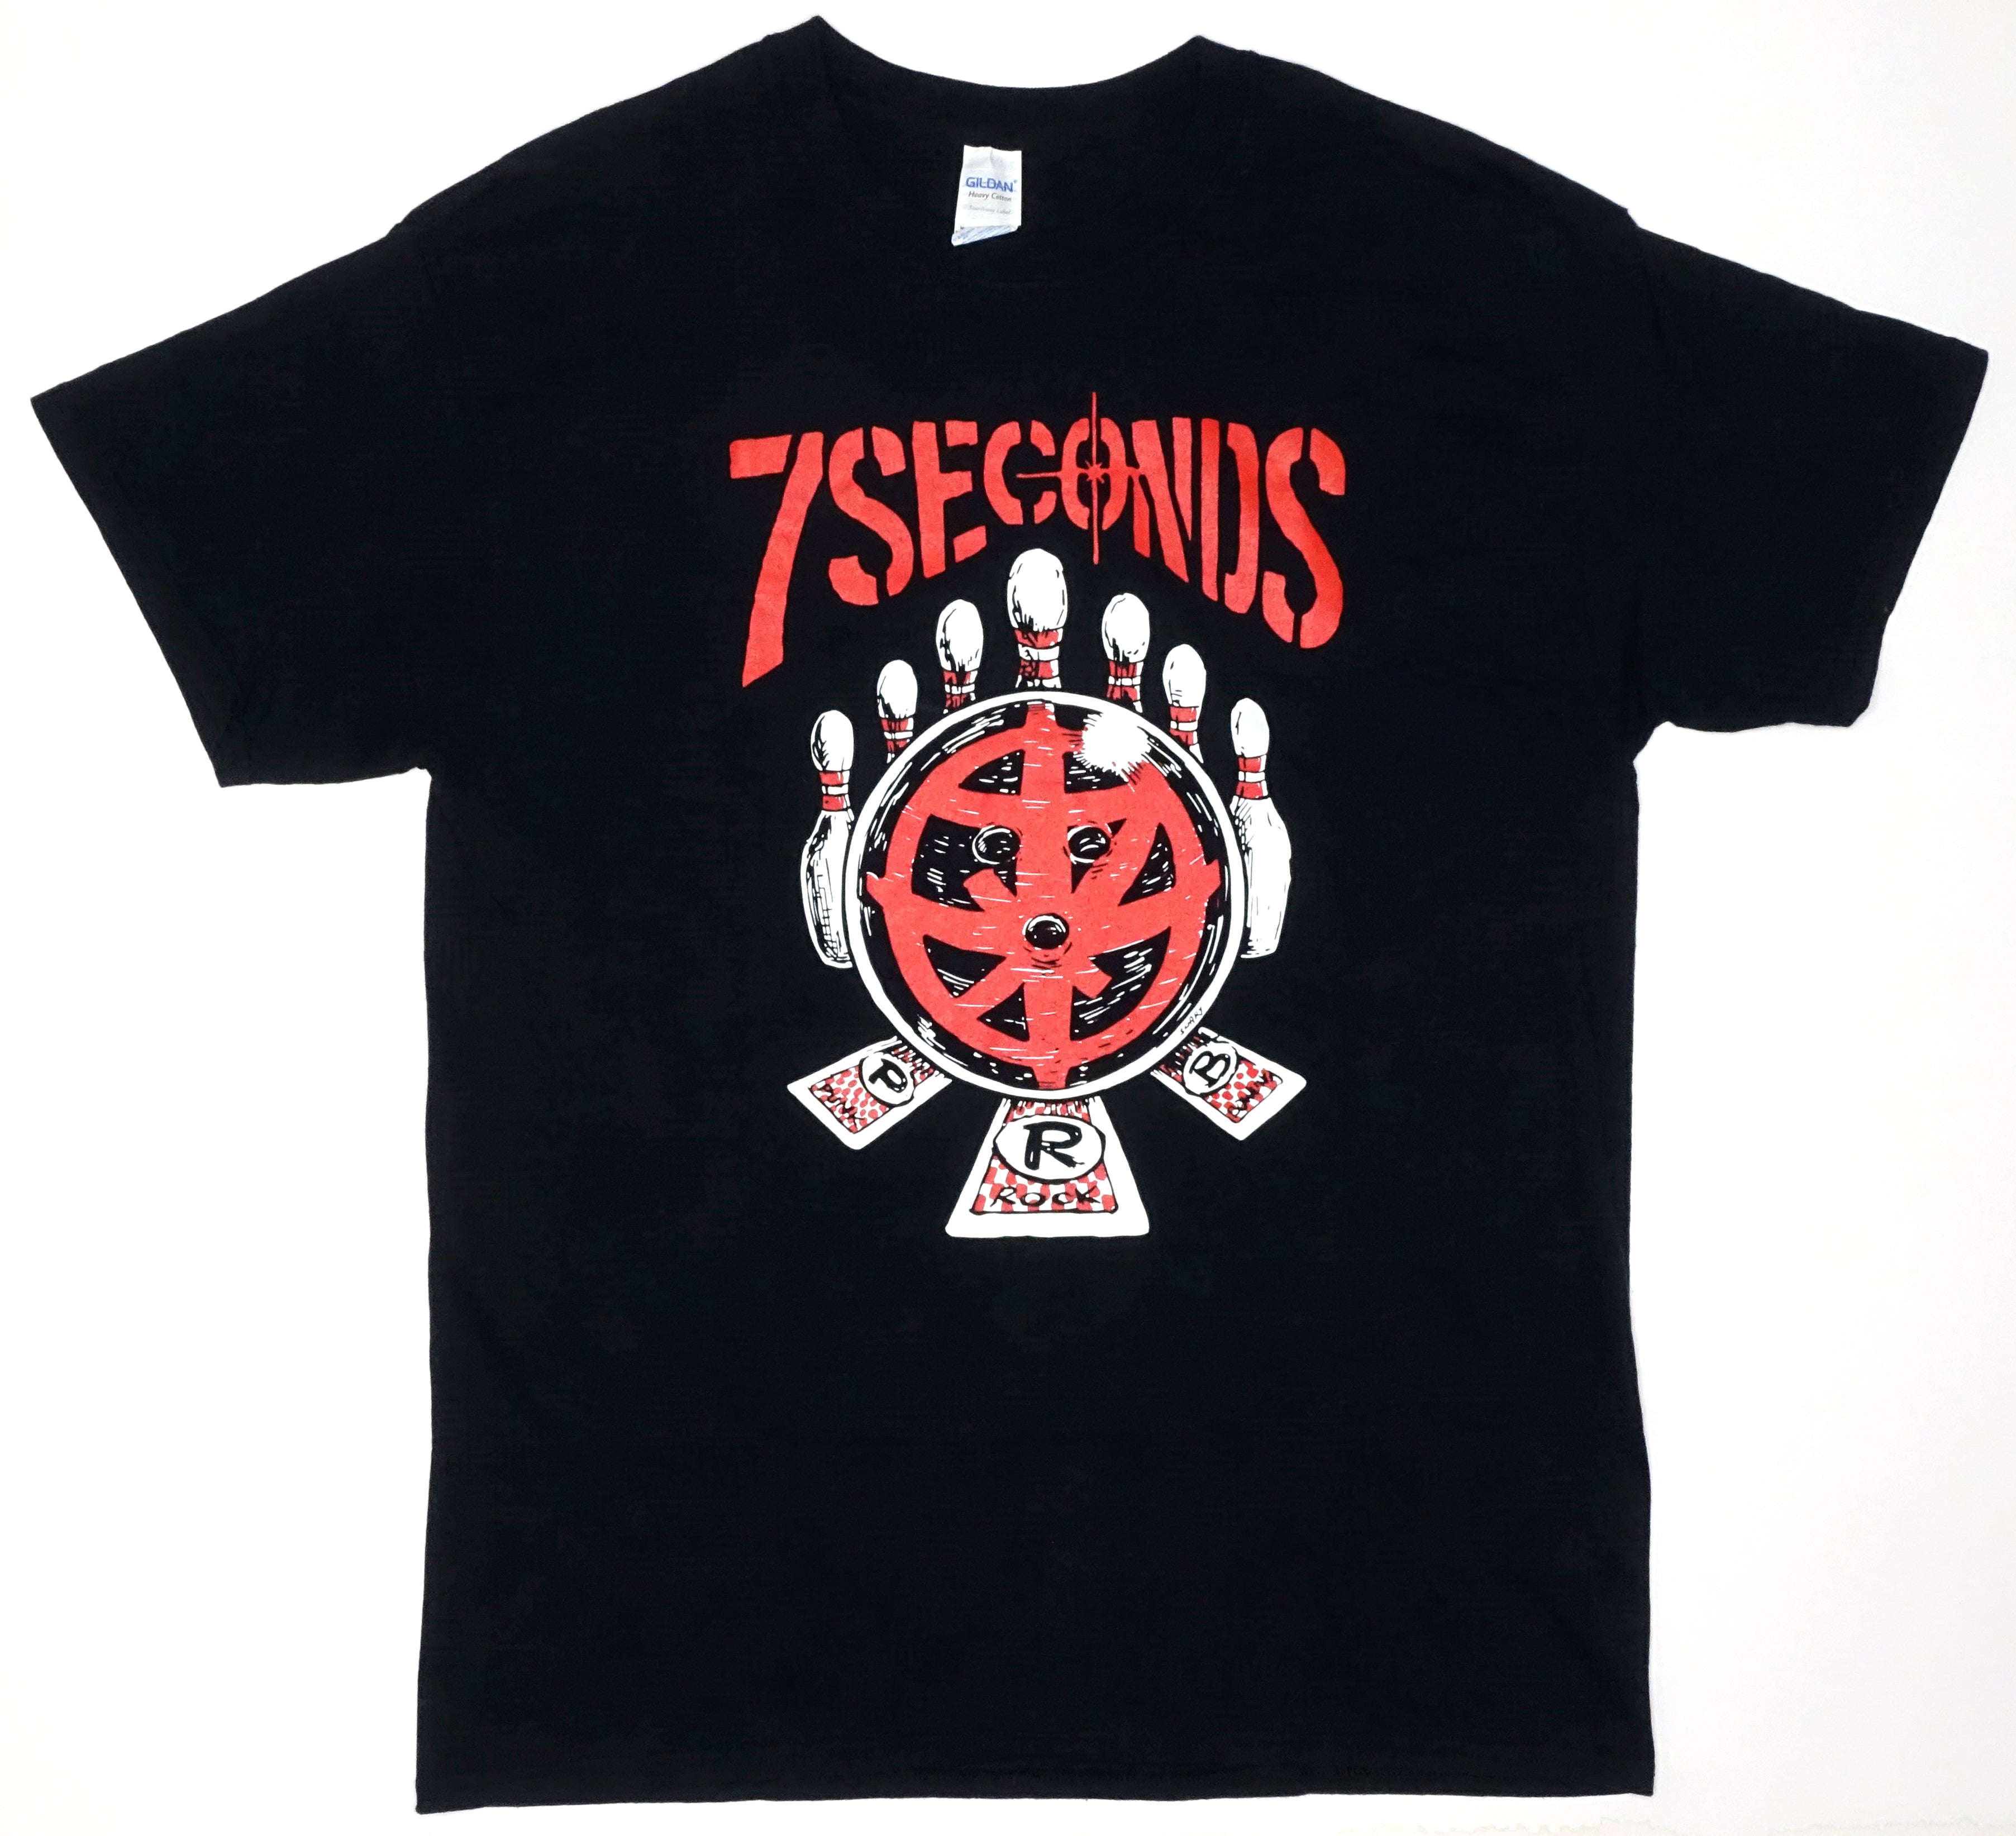 7 Seconds  ‎–  2012 Punk Rock Bowling by Chris Shary Shirt Size Large